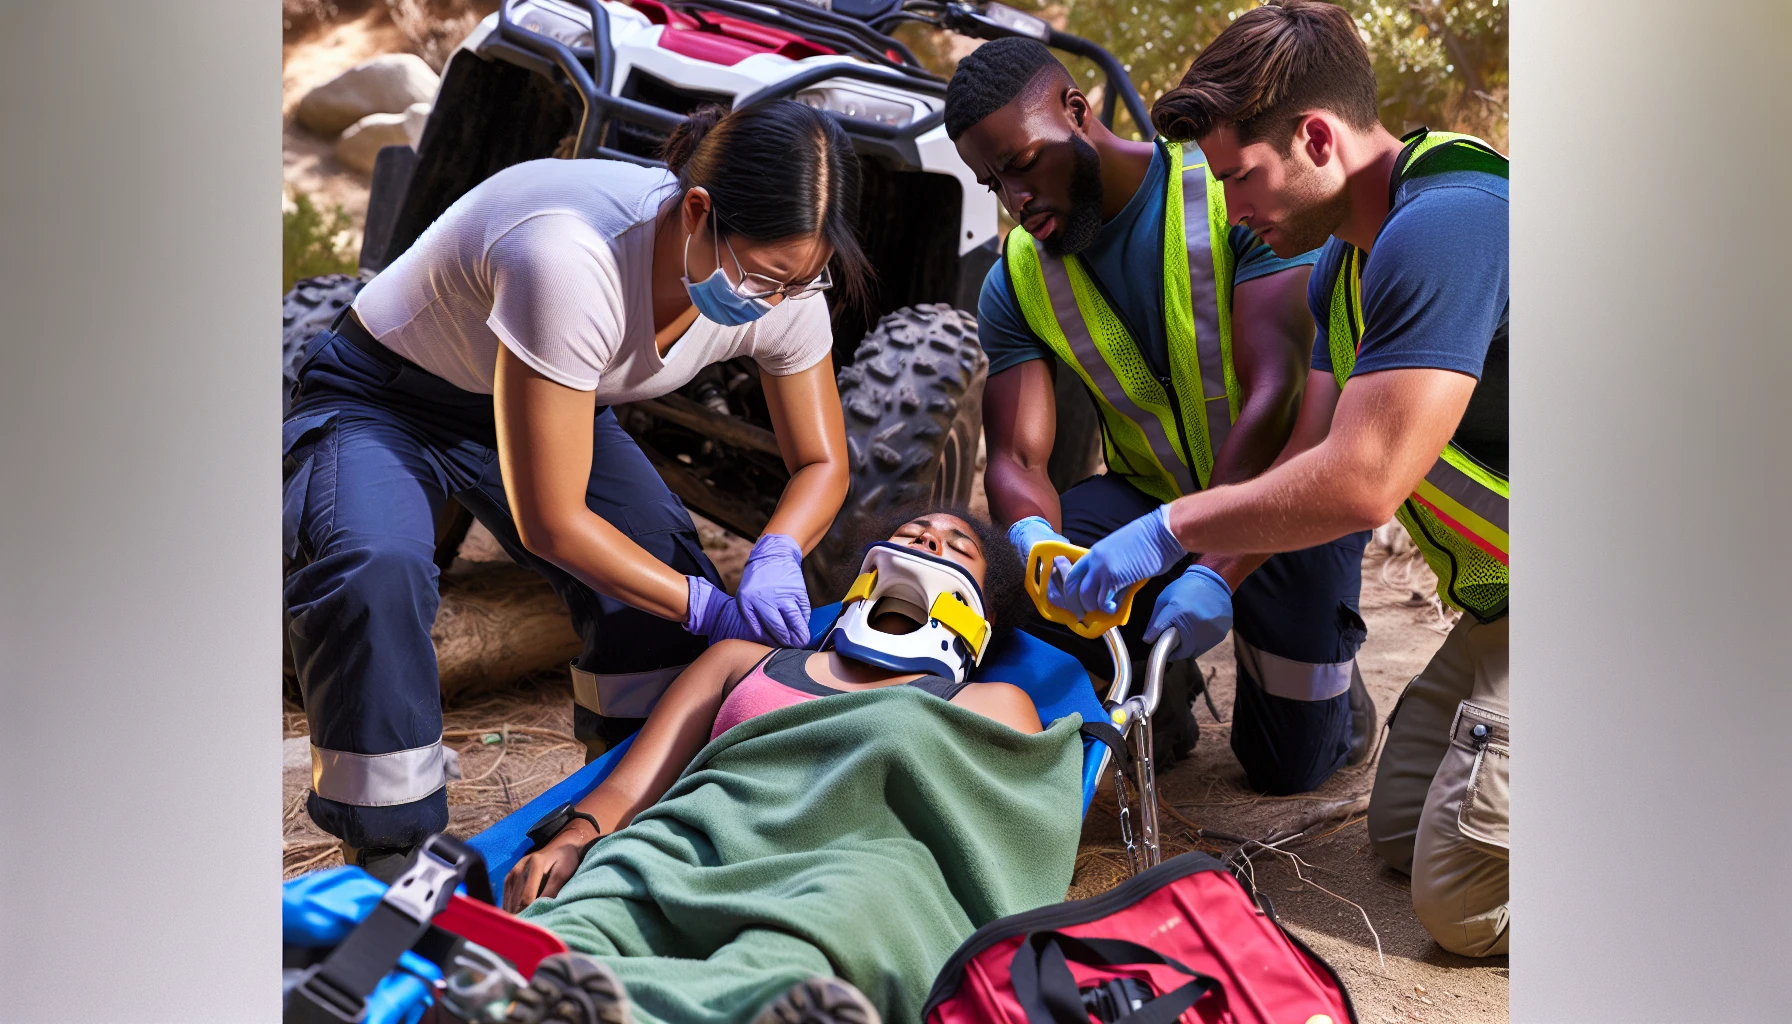 Emergency medical team providing care to an ATV accident victim